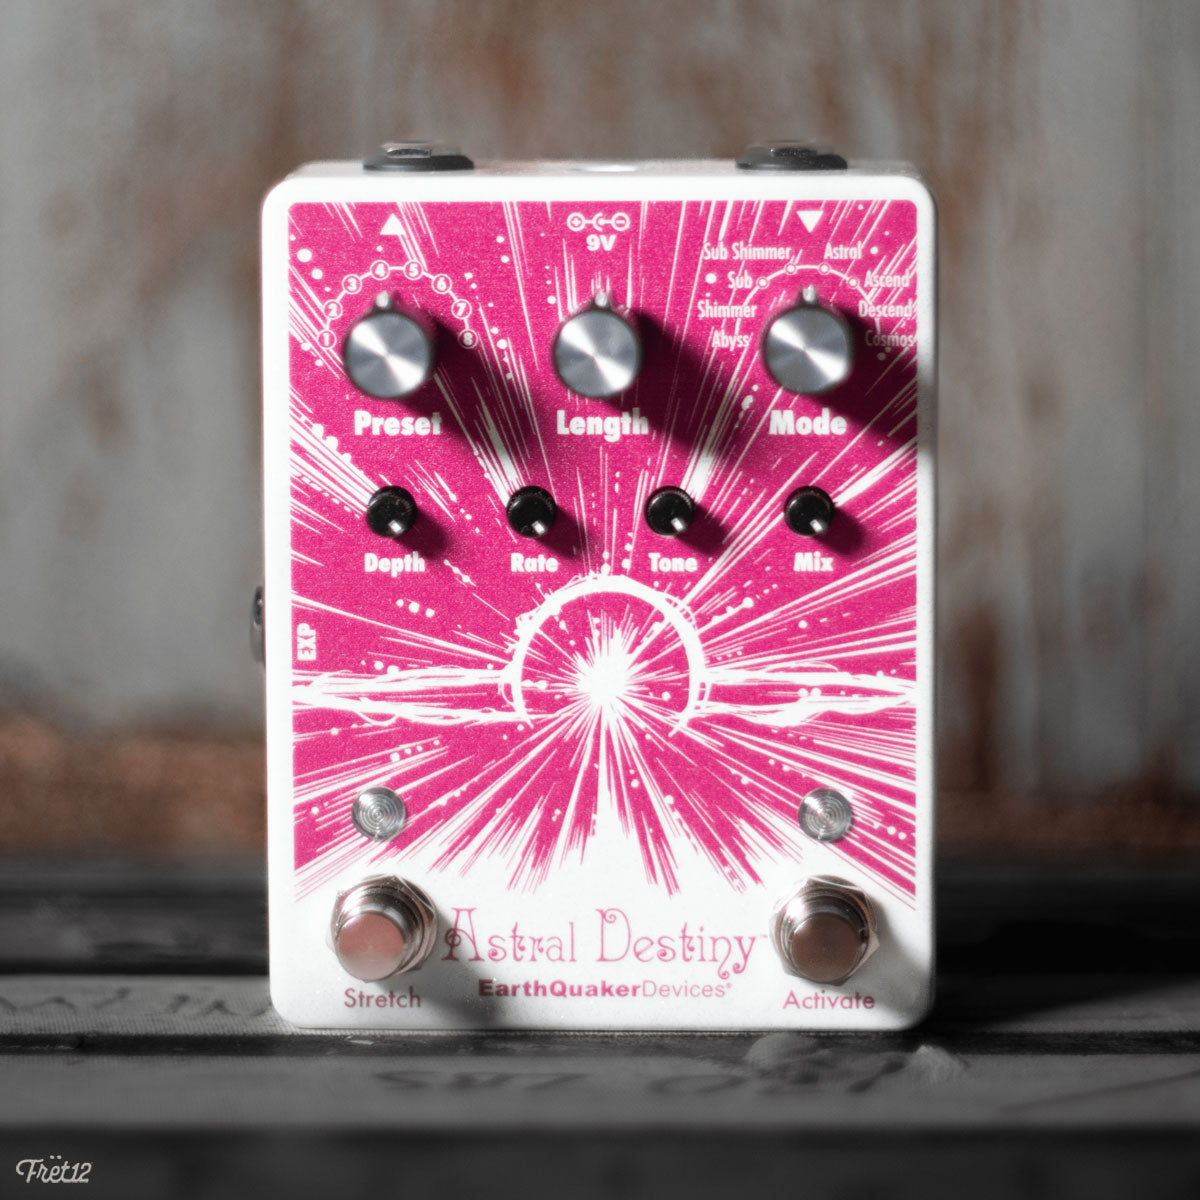 Astral Destiny by Earthquaker Devices